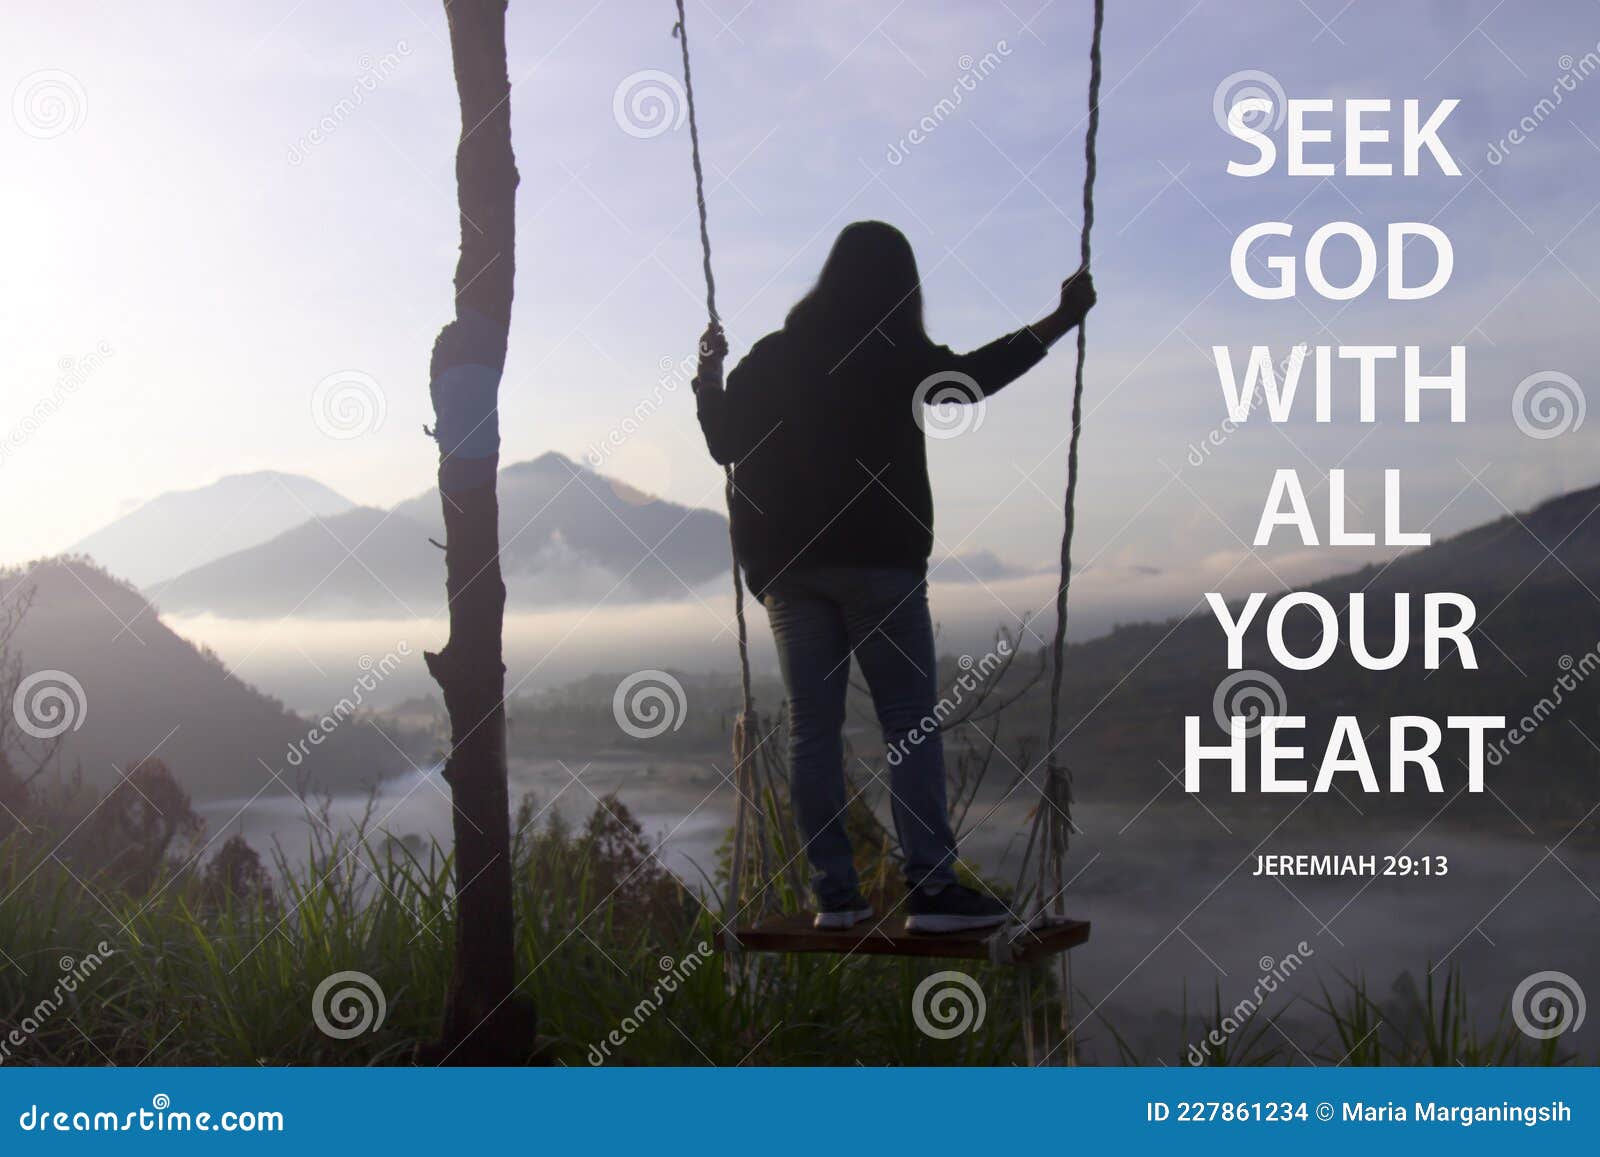 bible verse quote - seek god with all your heart. jeremiah 29:13 with woman standing on wooden swing looking at misty morning view